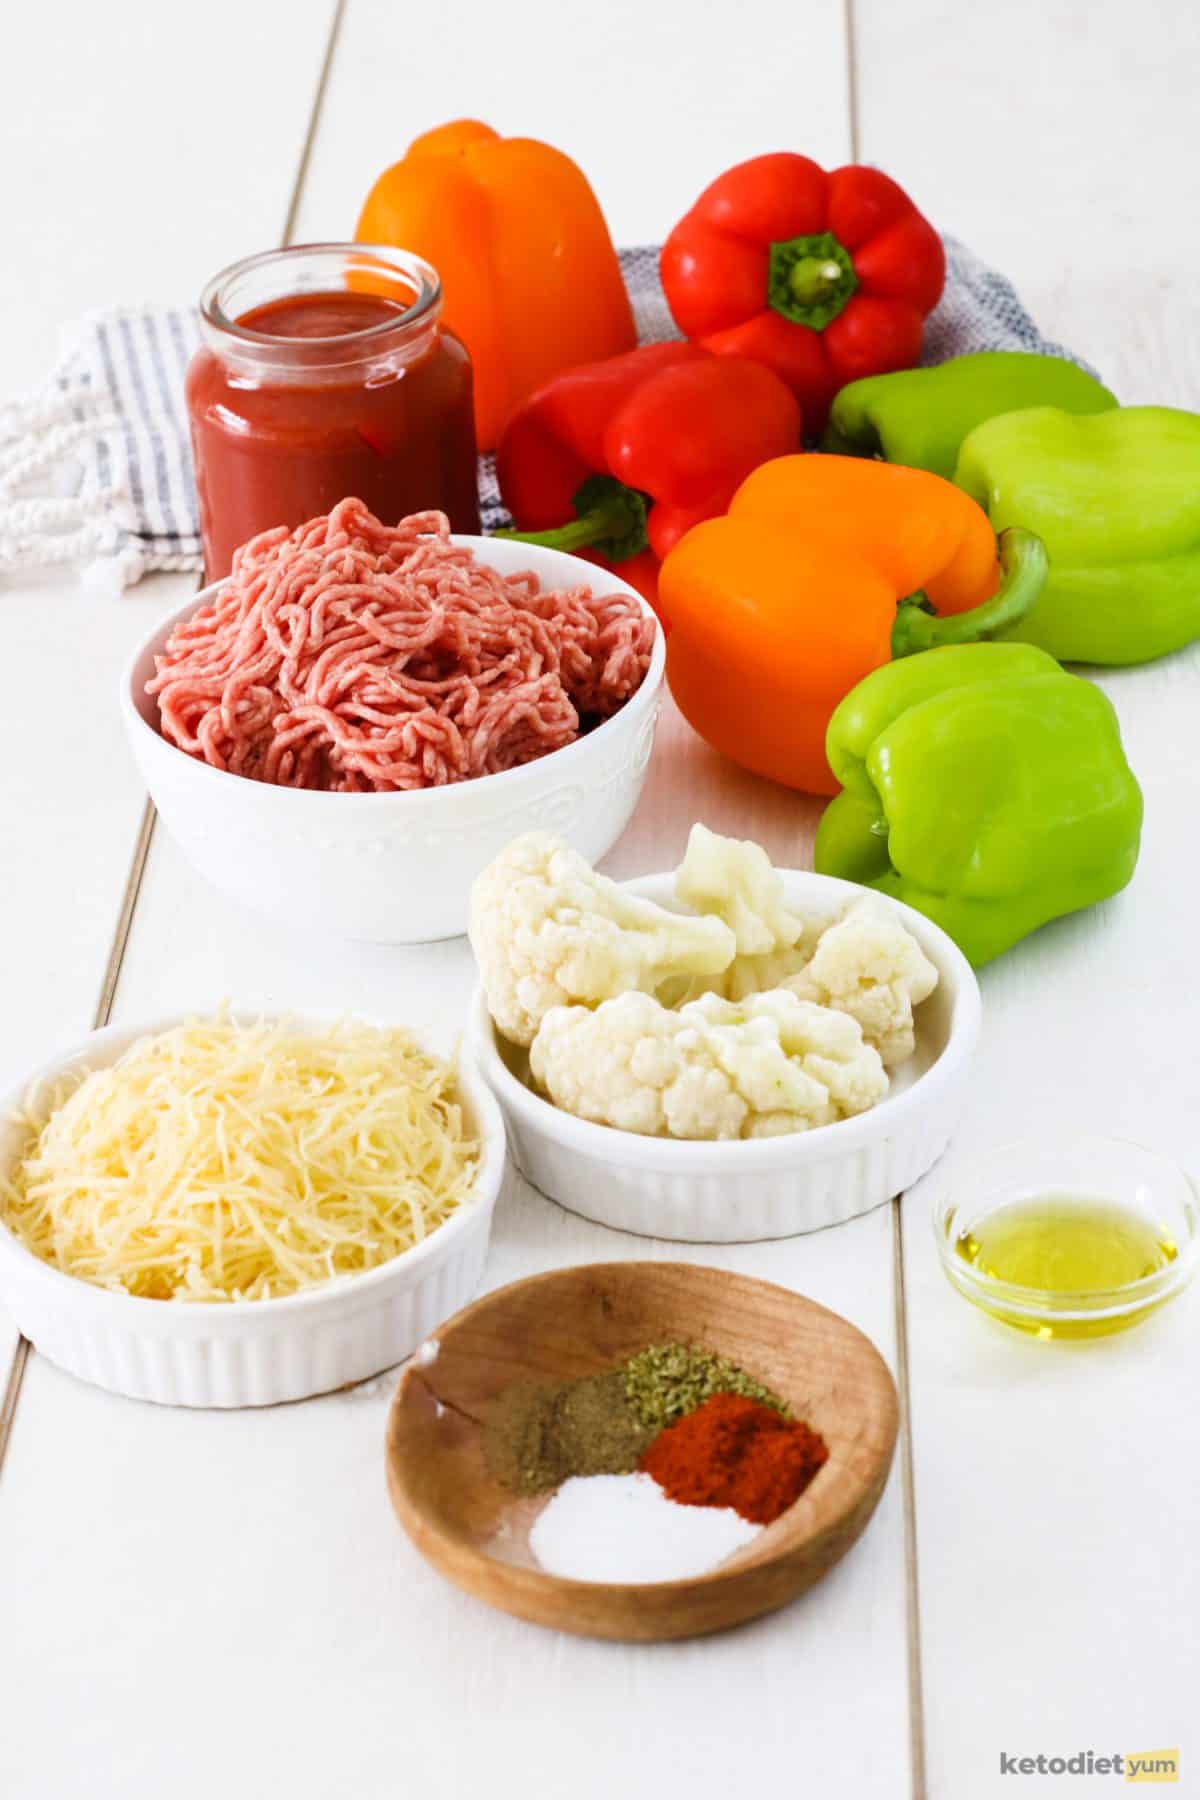 Fresh ingredients arranged on a table including bell peppers, ground beef, cauliflower, cheese, crushed tomatoes, olive oil, herbs and seasonings